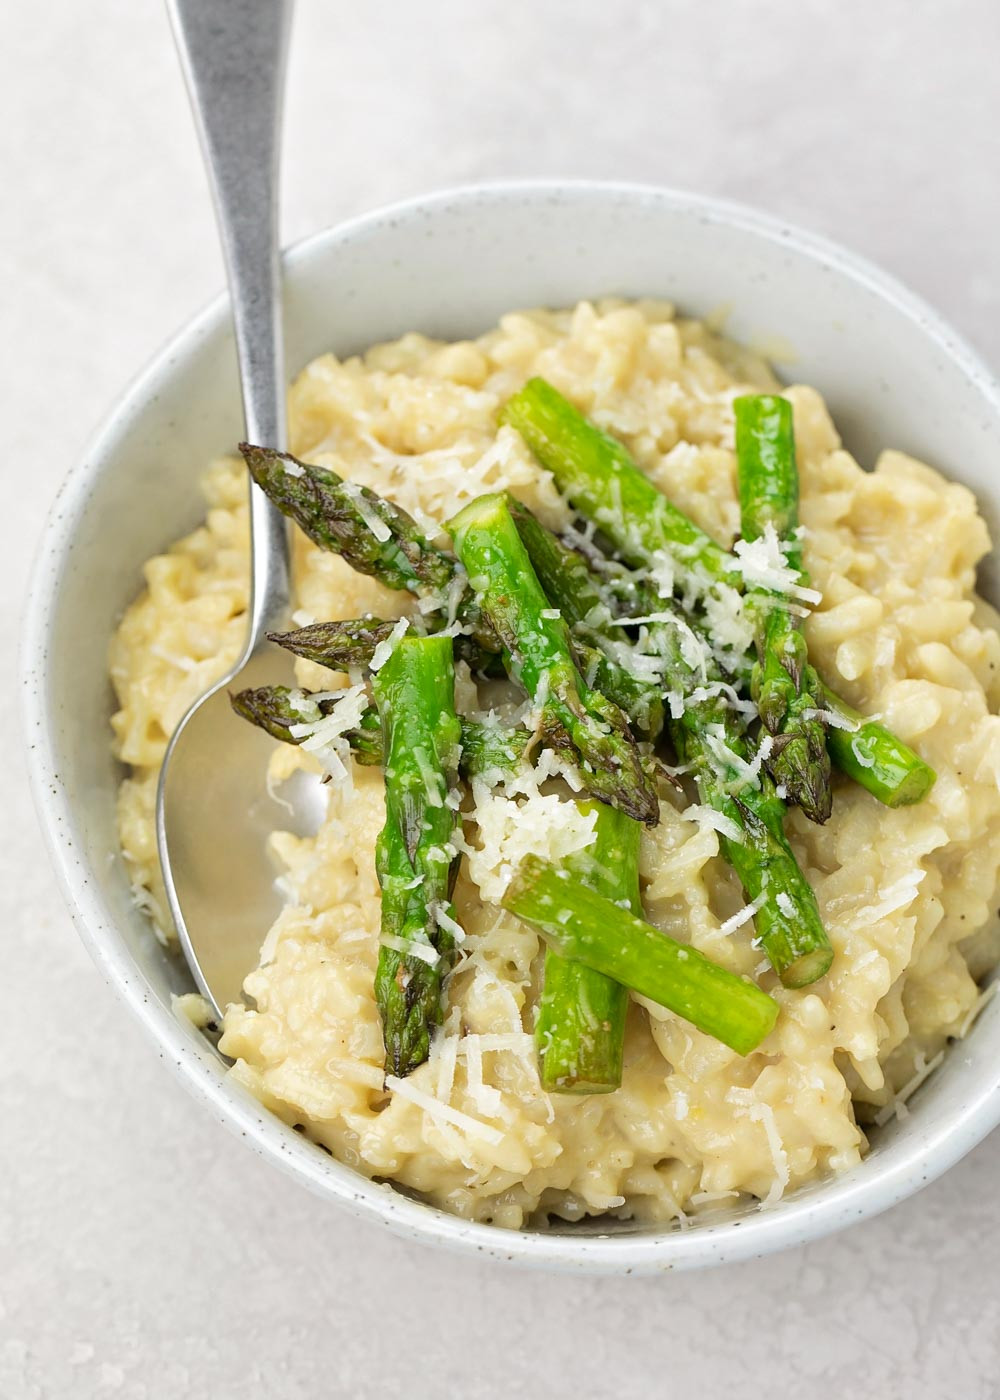 Instant Pot asparagus Risotto Beautiful Instant Pot asparagus Risotto Recipe